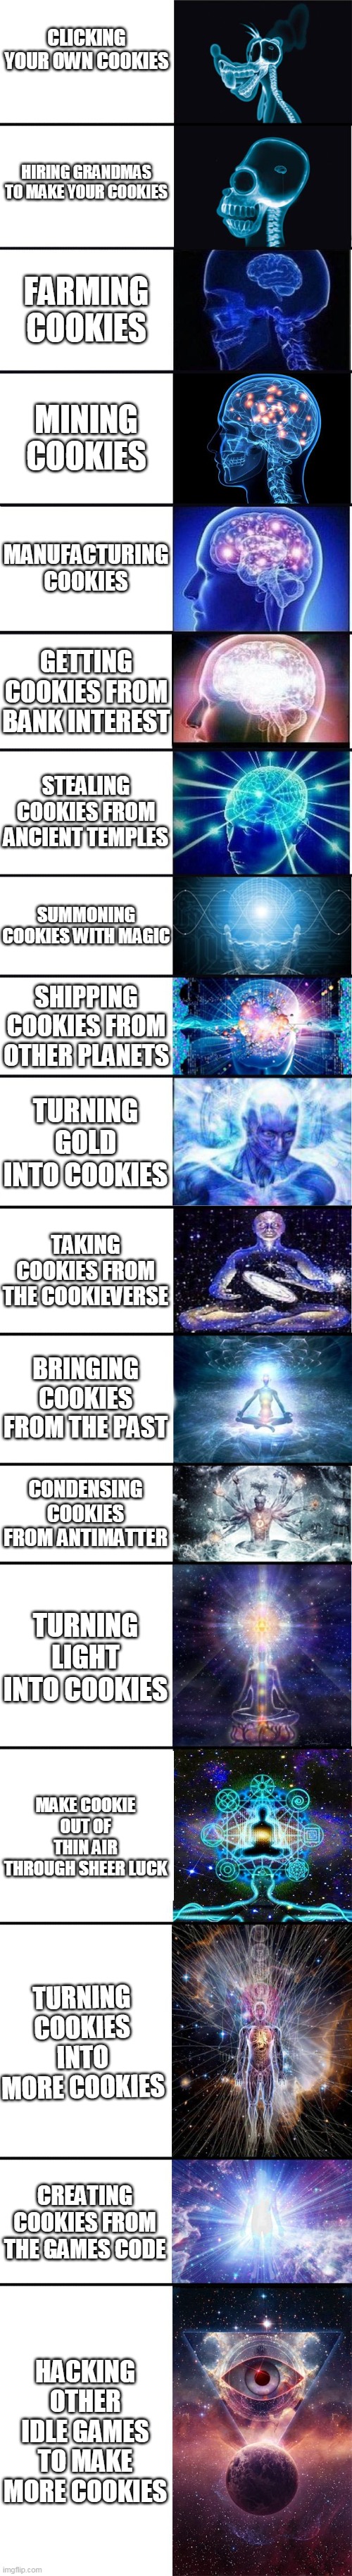 expanding brain: 9001 | CLICKING YOUR OWN COOKIES; HIRING GRANDMAS TO MAKE YOUR COOKIES; FARMING COOKIES; MINING COOKIES; MANUFACTURING COOKIES; GETTING COOKIES FROM BANK INTEREST; STEALING COOKIES FROM ANCIENT TEMPLES; SUMMONING COOKIES WITH MAGIC; SHIPPING COOKIES FROM OTHER PLANETS; TURNING GOLD INTO COOKIES; TAKING COOKIES FROM THE COOKIEVERSE; BRINGING COOKIES FROM THE PAST; CONDENSING COOKIES FROM ANTIMATTER; TURNING LIGHT INTO COOKIES; MAKE COOKIE OUT OF THIN AIR THROUGH SHEER LUCK; TURNING COOKIES INTO MORE COOKIES; CREATING COOKIES FROM THE GAMES CODE; HACKING OTHER IDLE GAMES TO MAKE MORE COOKIES | image tagged in expanding brain 9001 | made w/ Imgflip meme maker